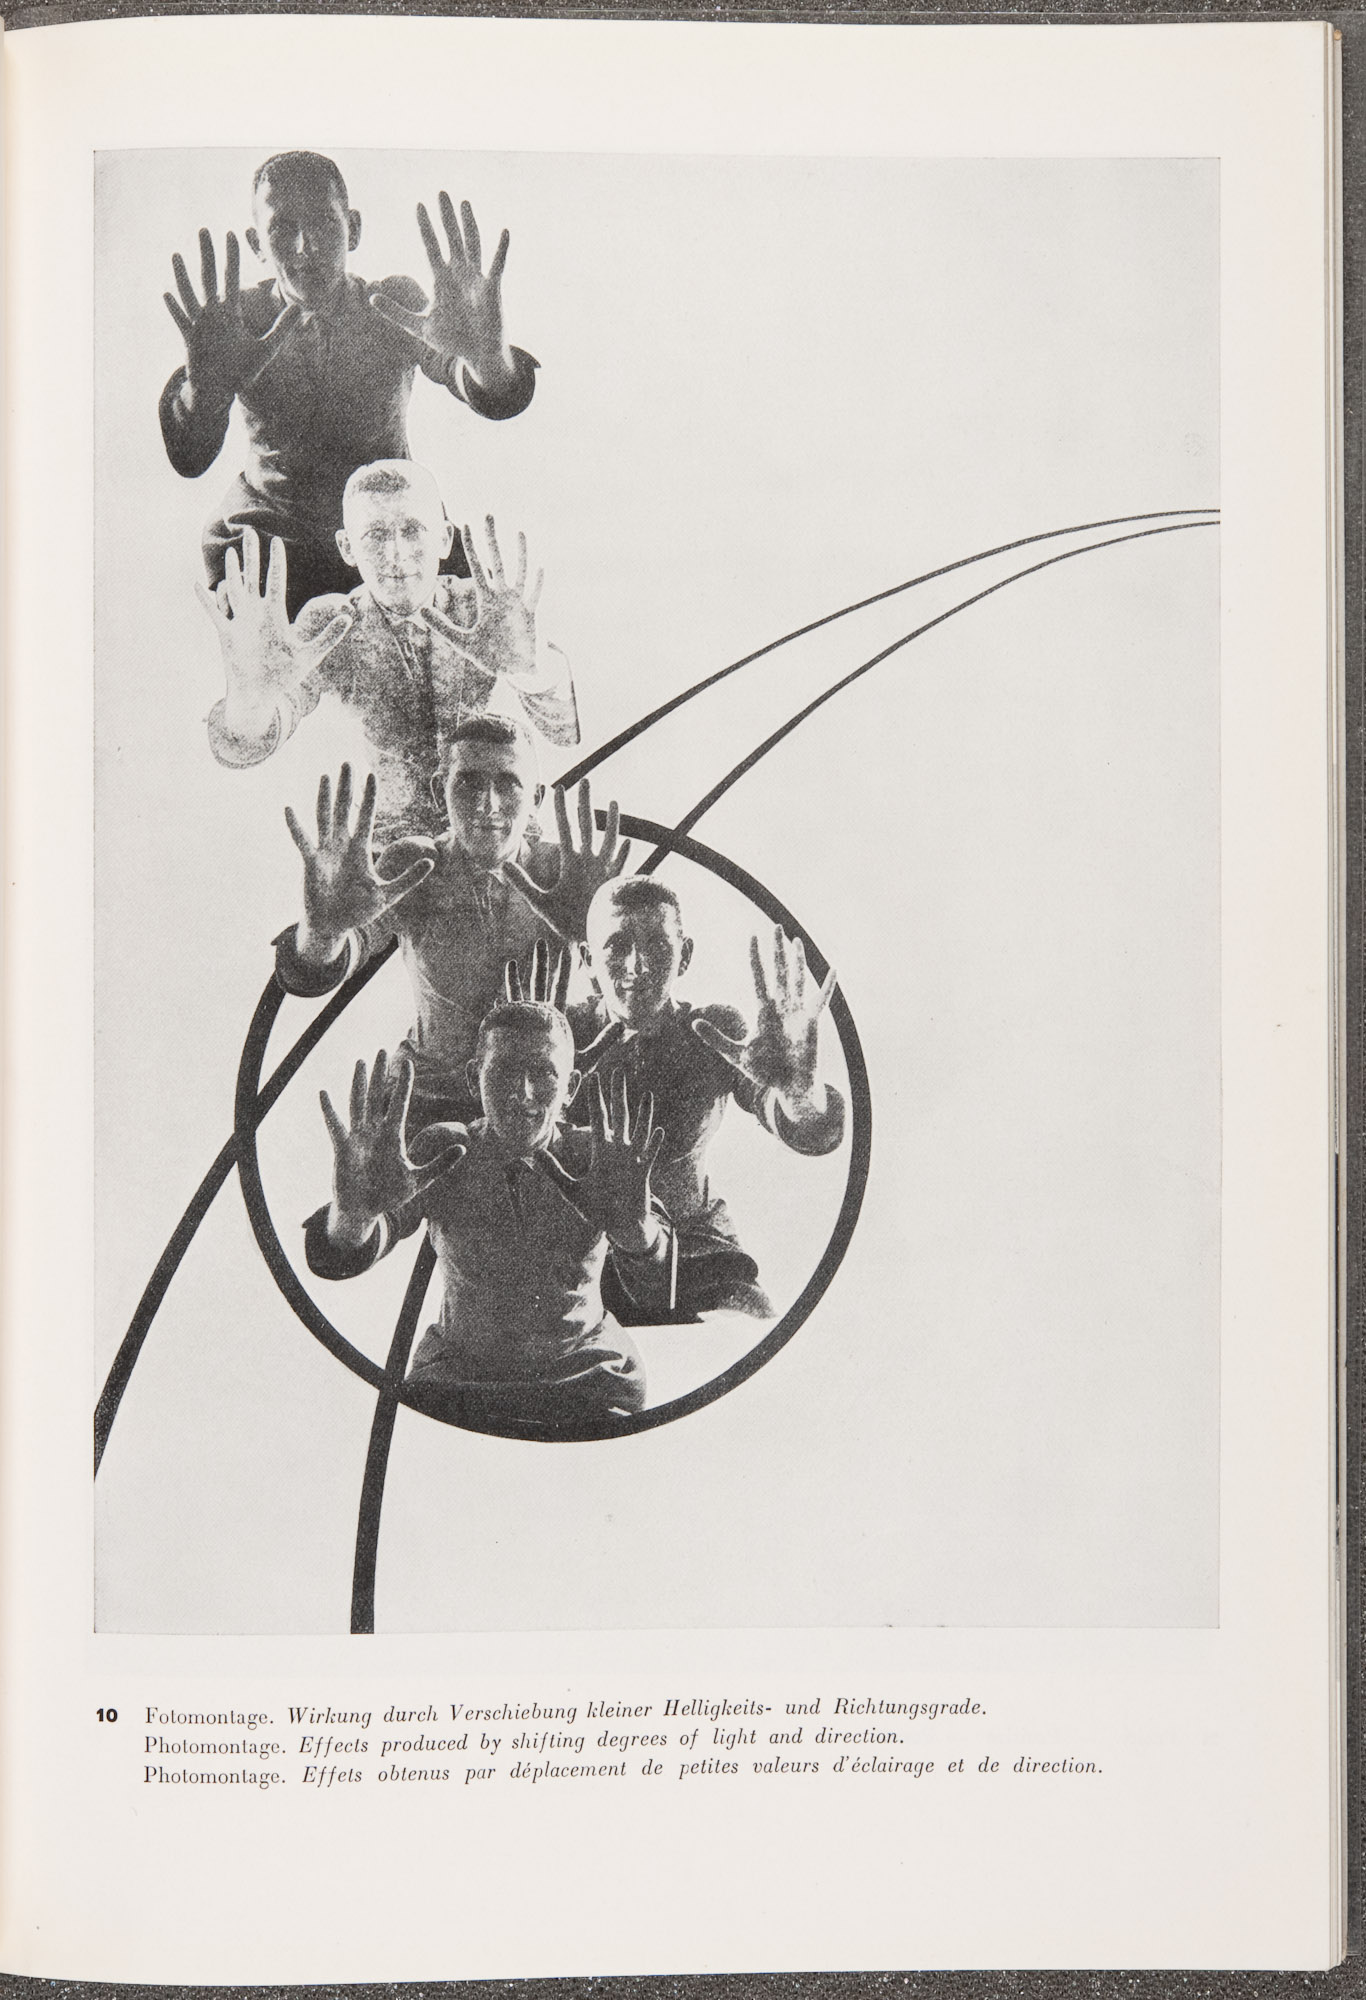 "Plate 10, Photomontage, Effects produced by shifting degrees of light and direction," from L. Moholy Nagy's 60 fotos (1930). St Andrews copy at Photo TR653.M64  